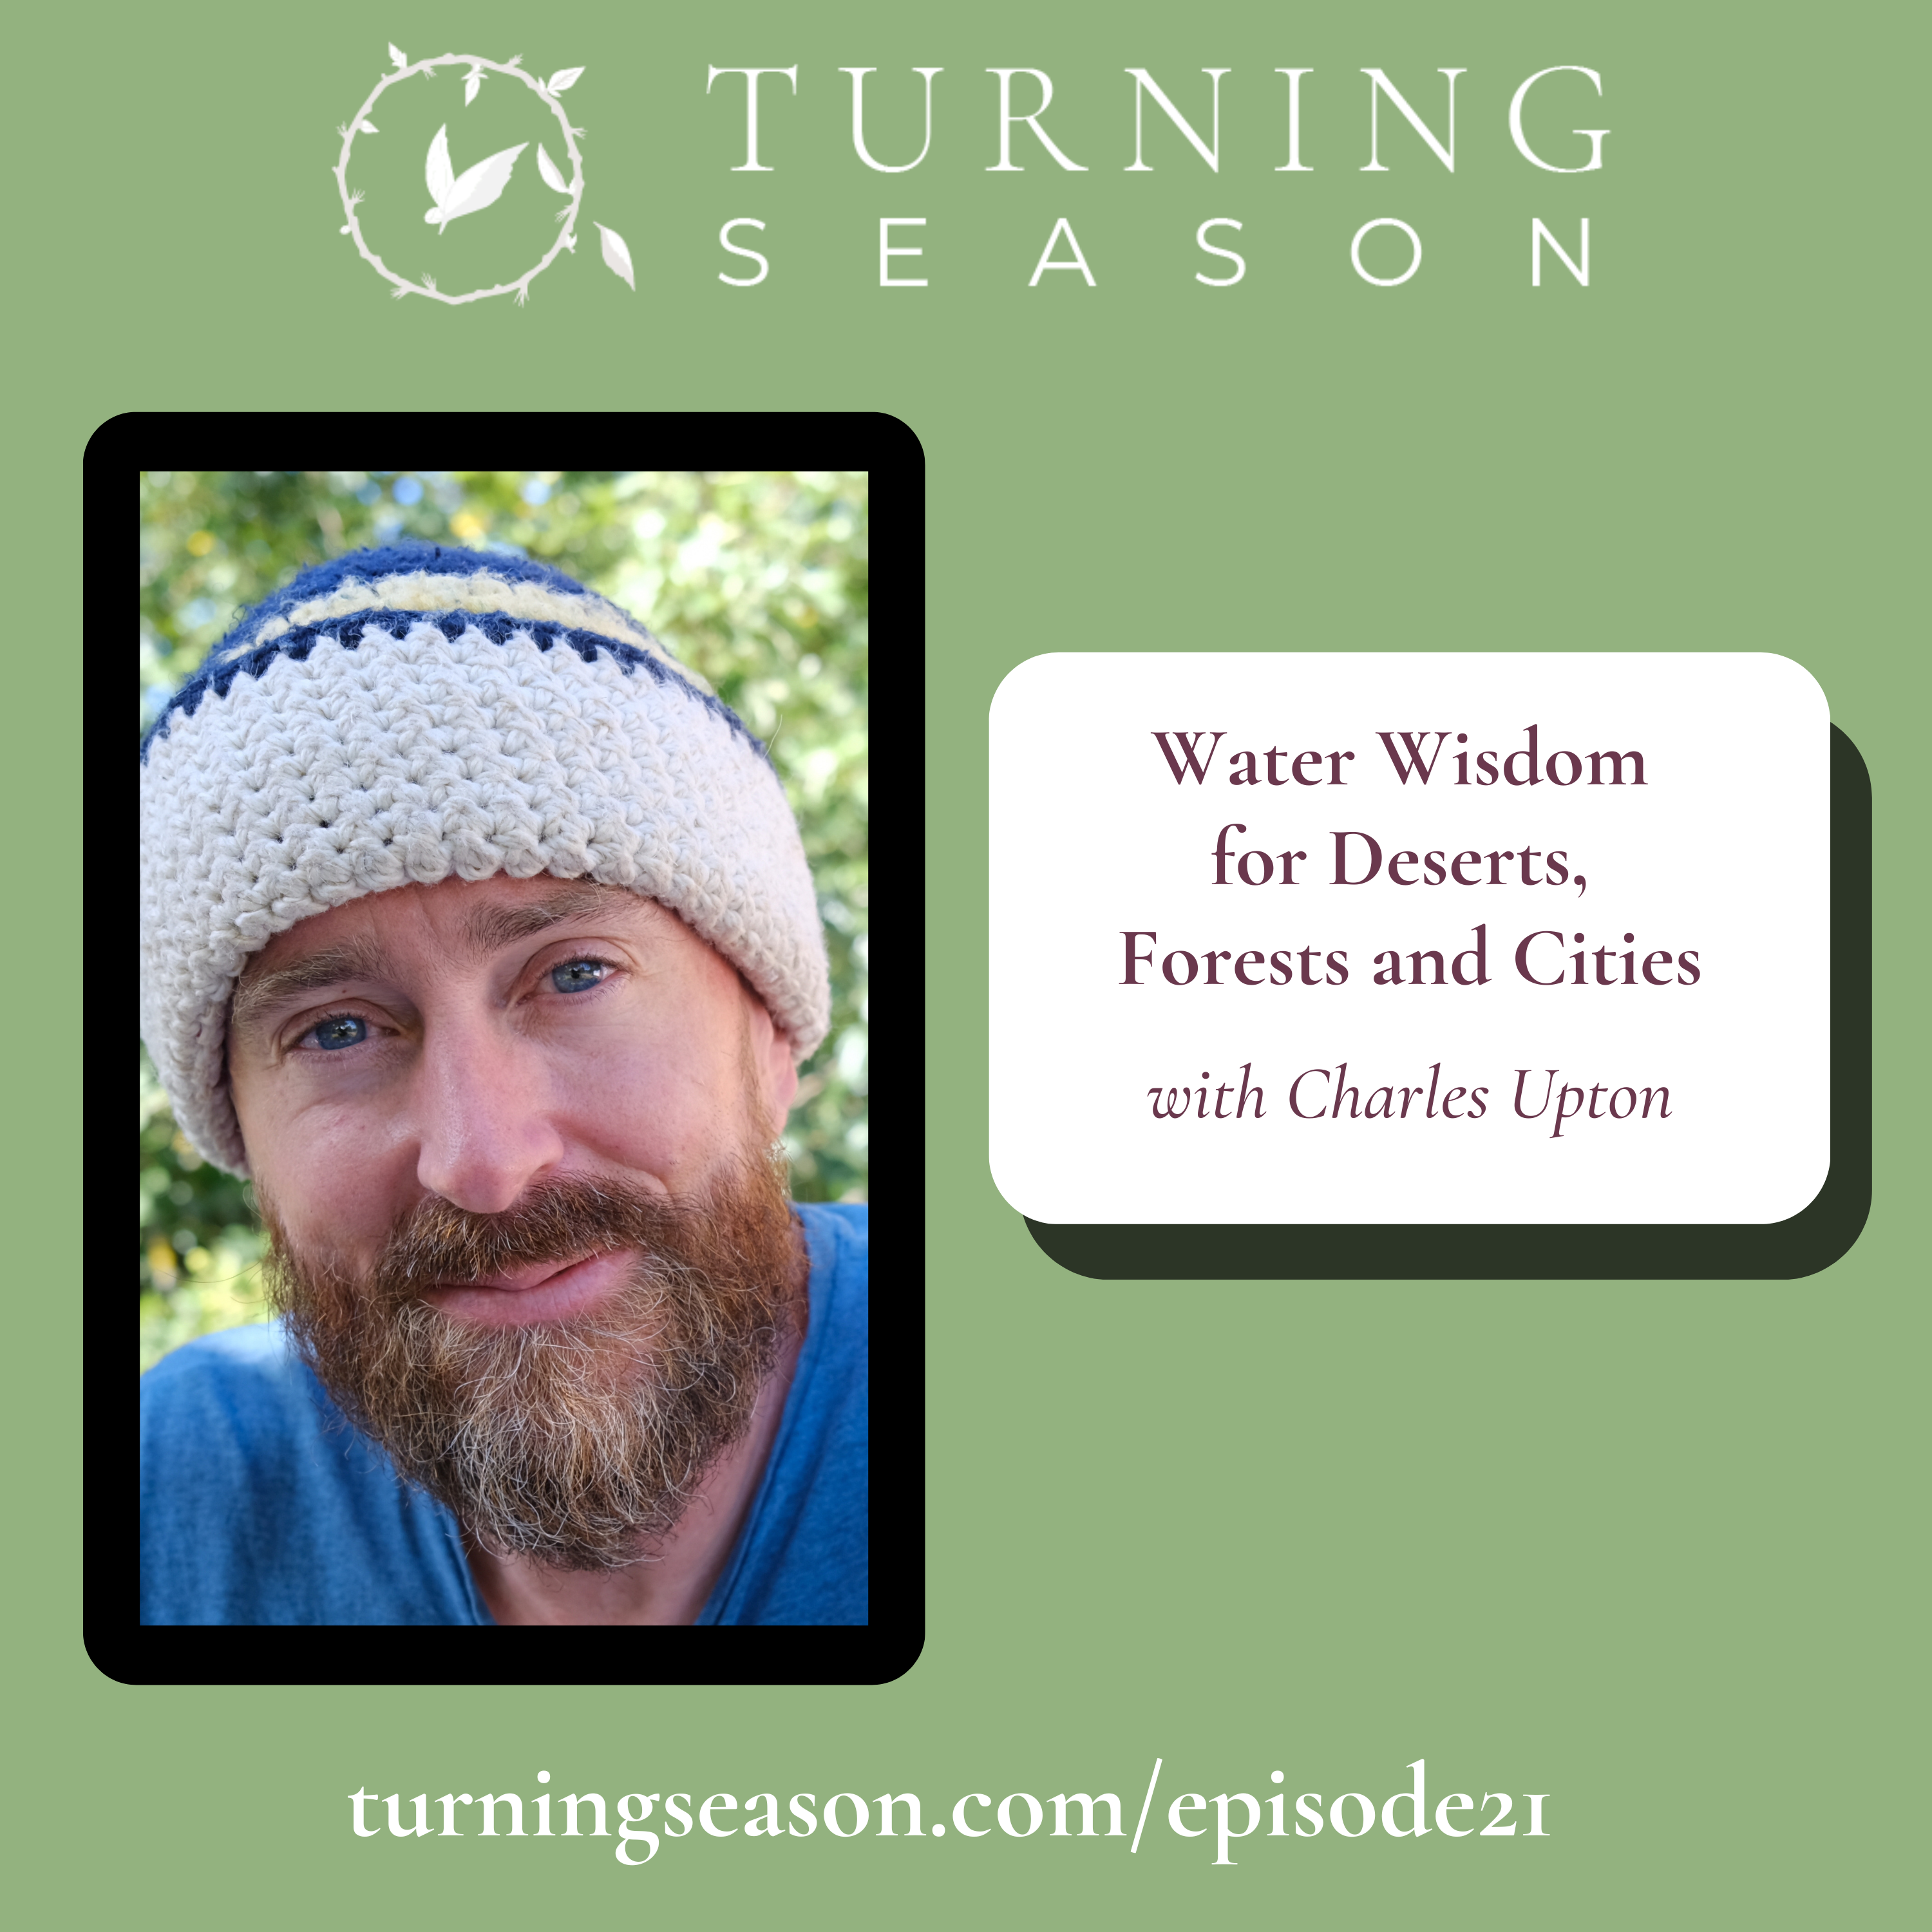 Turning Season Podcast Episode 21 Water Wisdom for Deserts, Forests and Cities with Charles Upton hosted by Leilani Navar turningseason.com